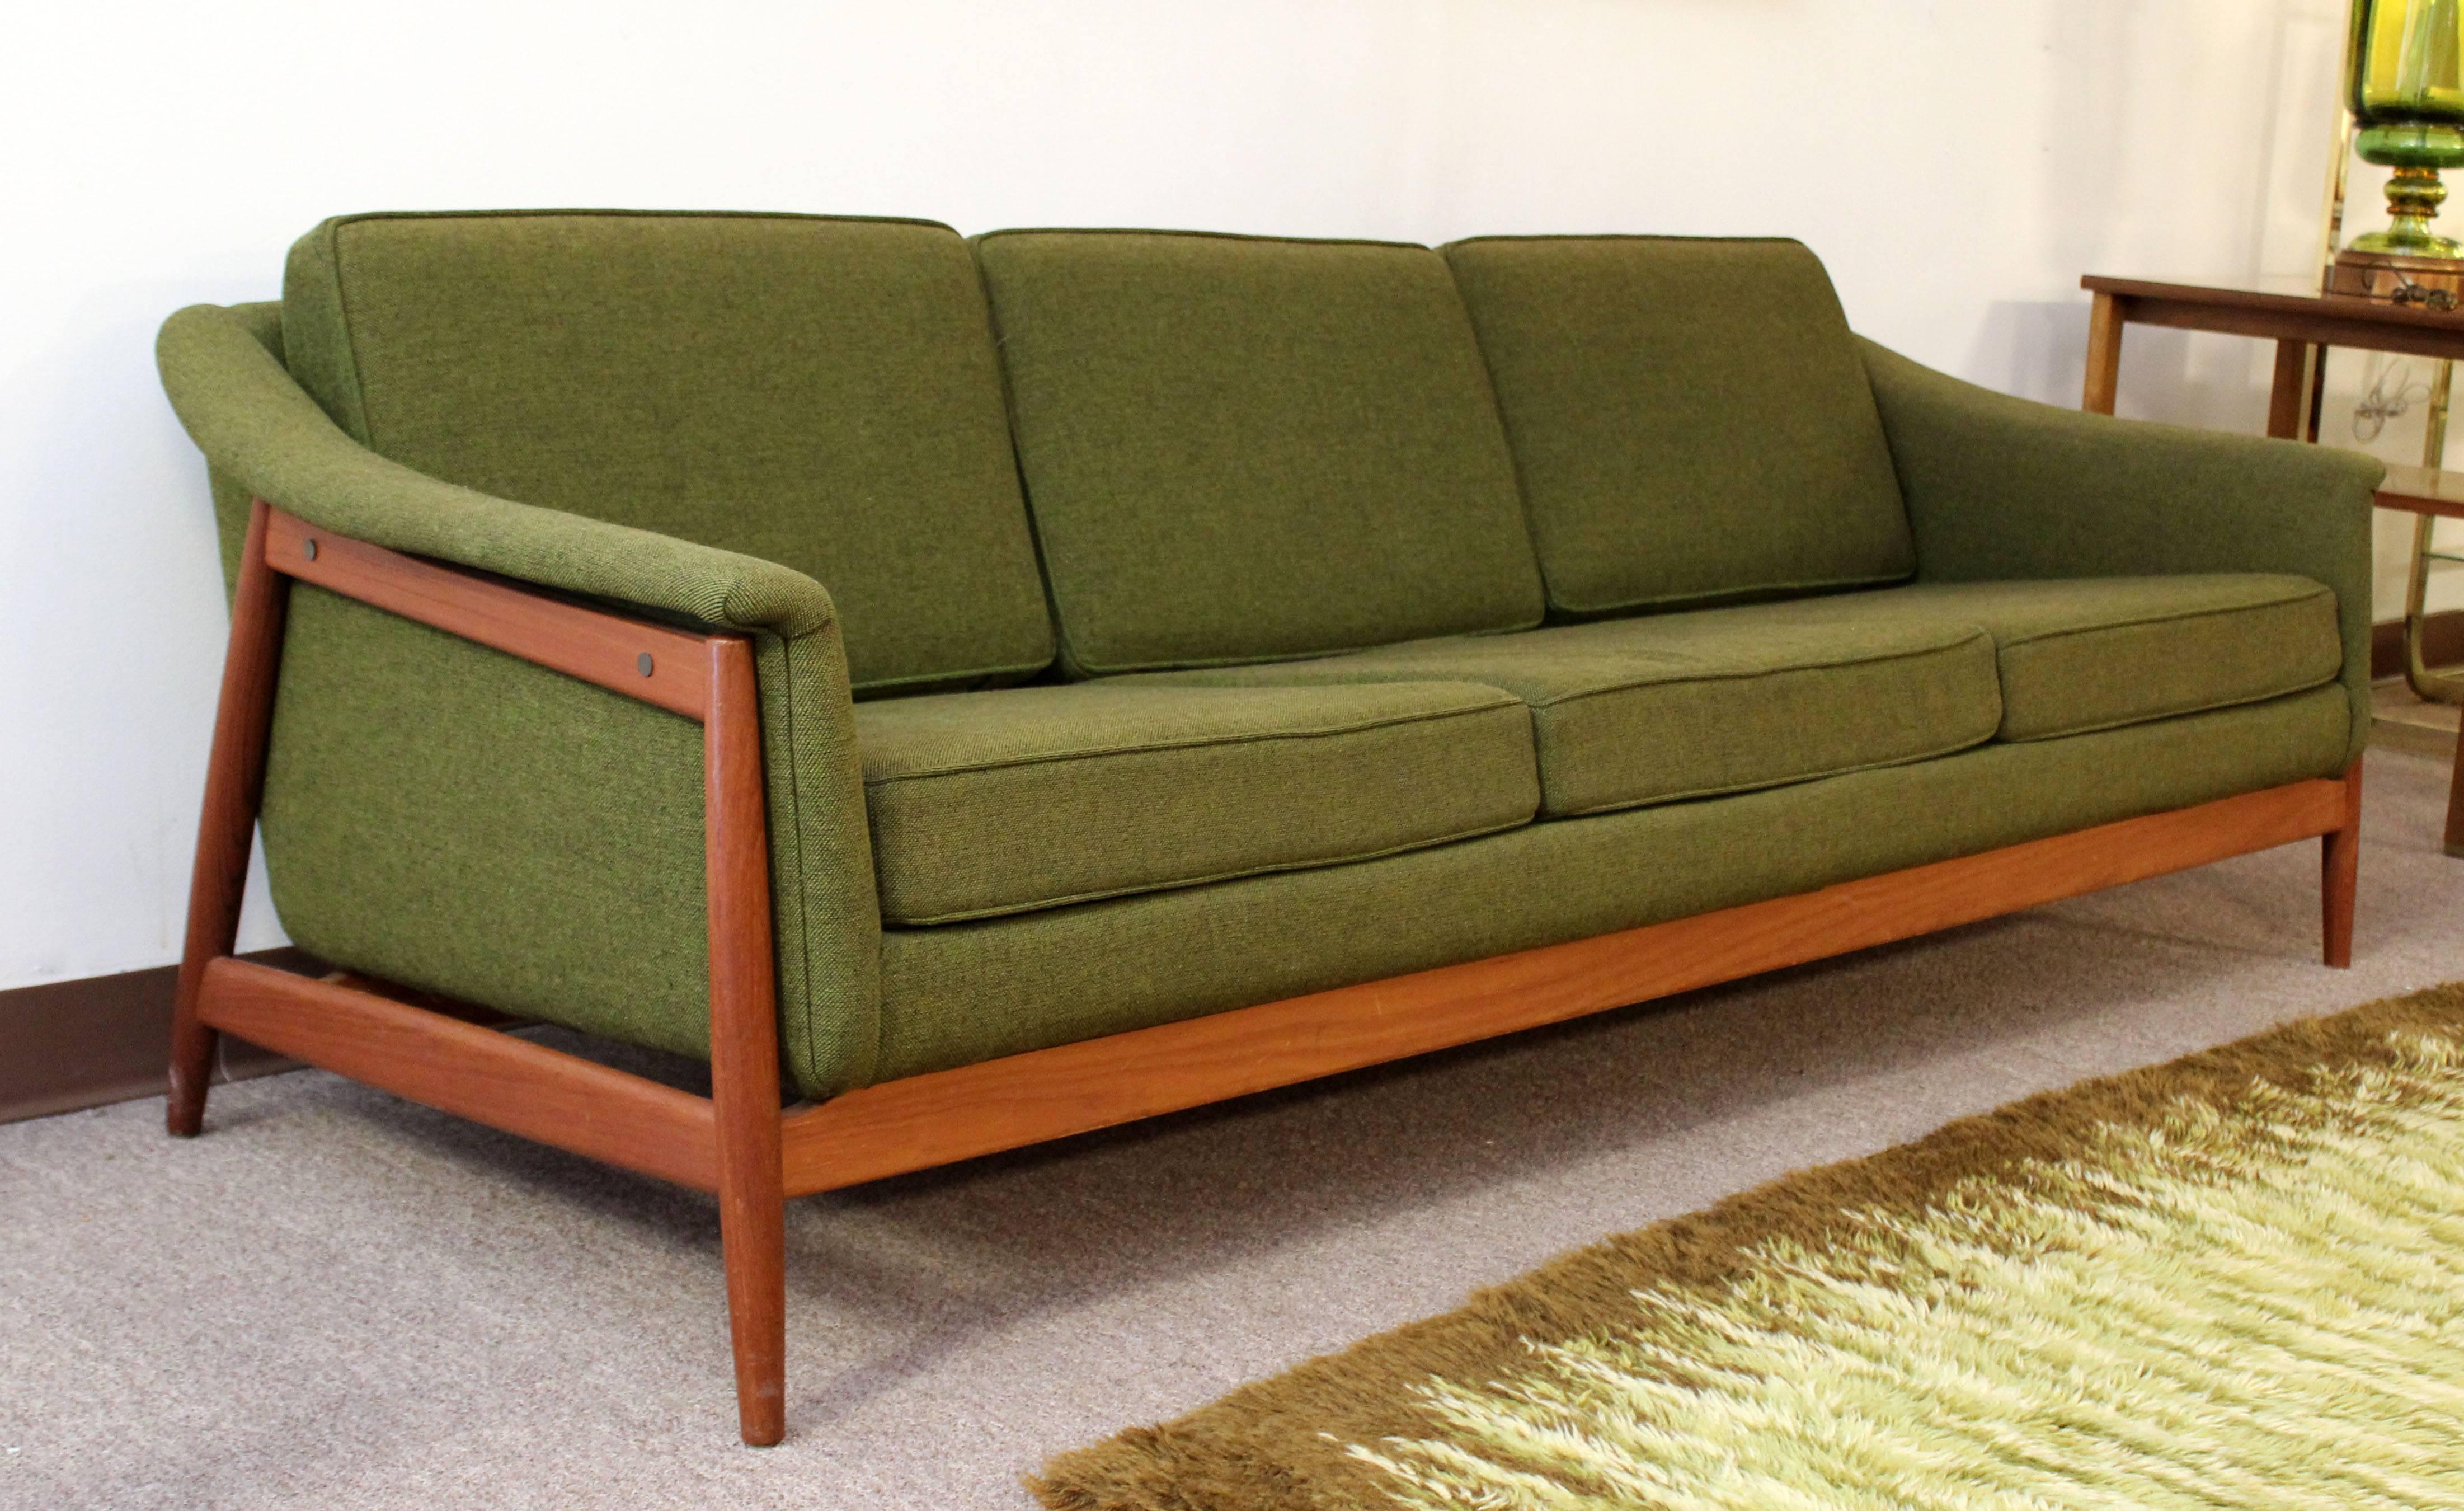 Mid-20th Century Mid-Century Modern Three-Seat Curved Wood Sofa by Folke Ohlsson for DUX Sweden